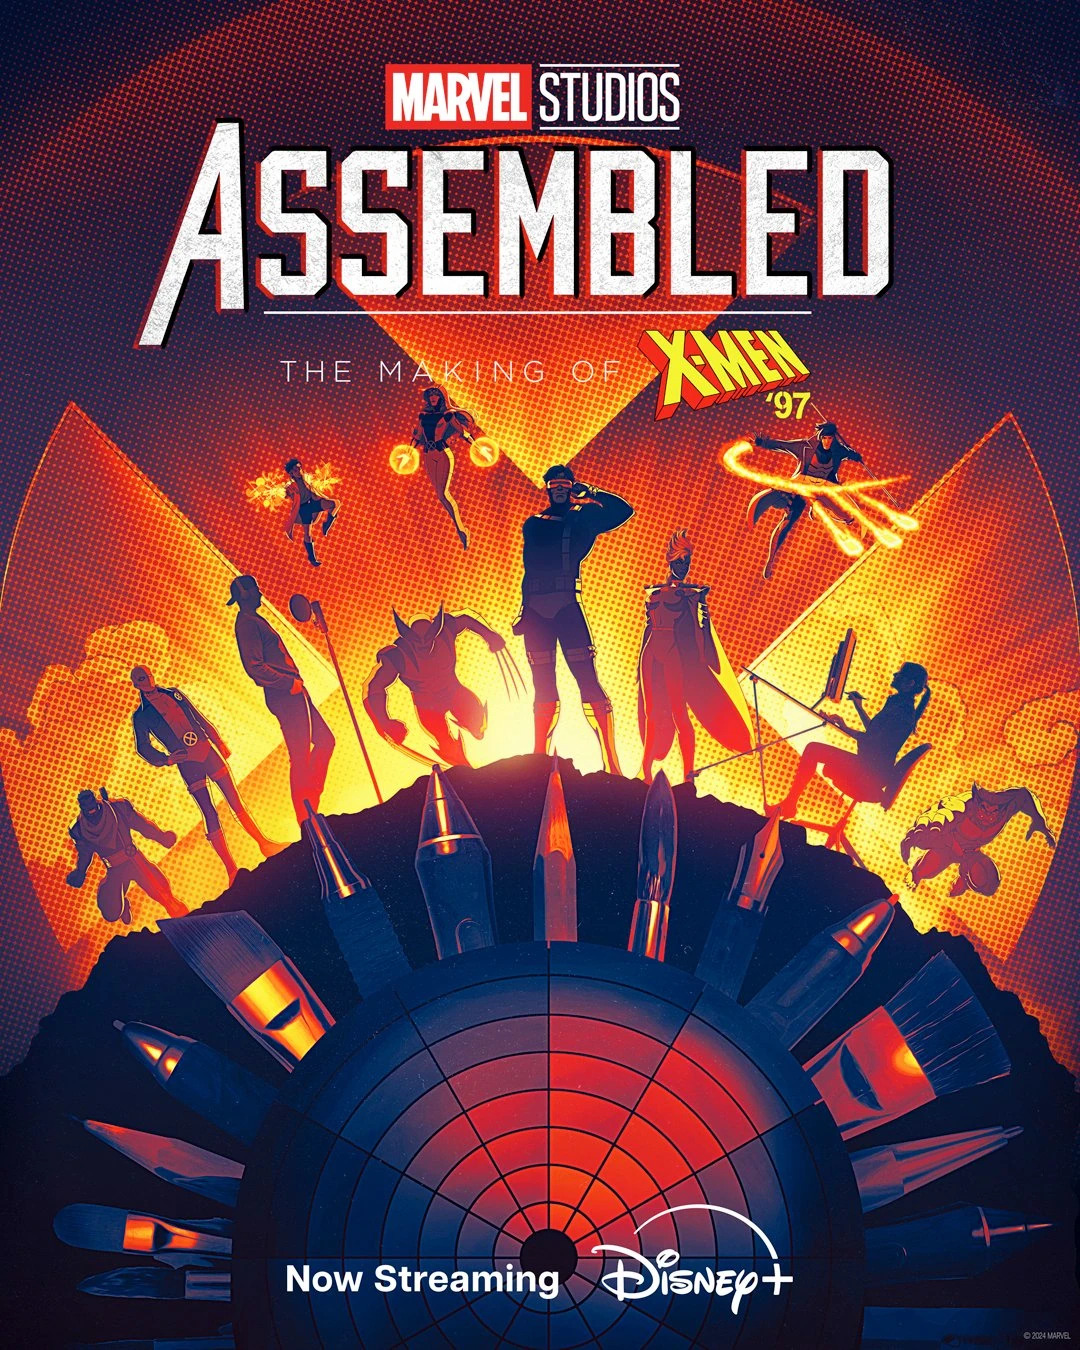 Extra Large TV Poster Image for Marvel Studios: Assembled (#21 of 21)